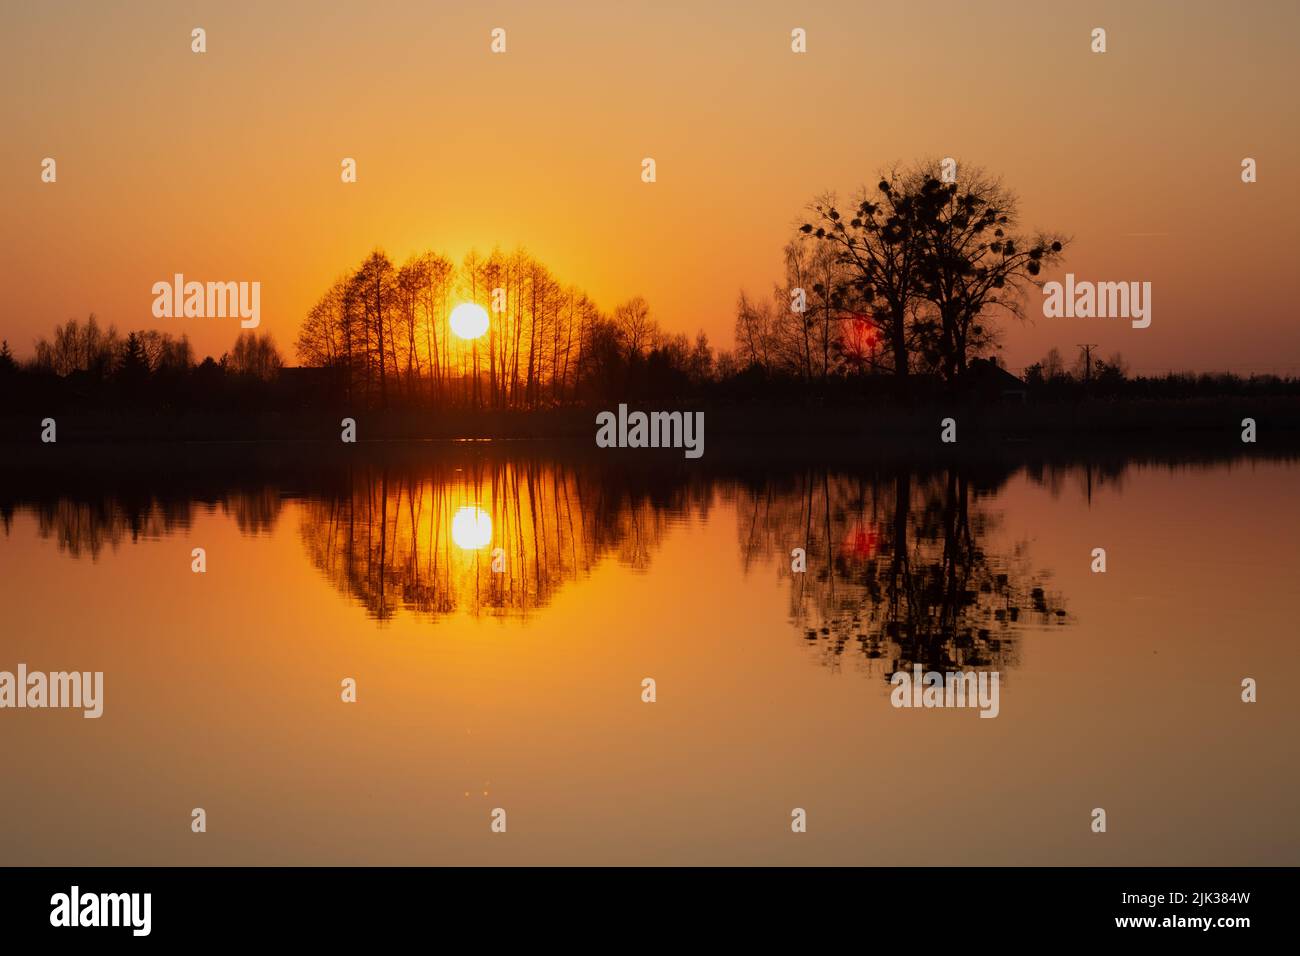 The reflection in the water of the sunset behind the trees, spring evening view Stock Photo